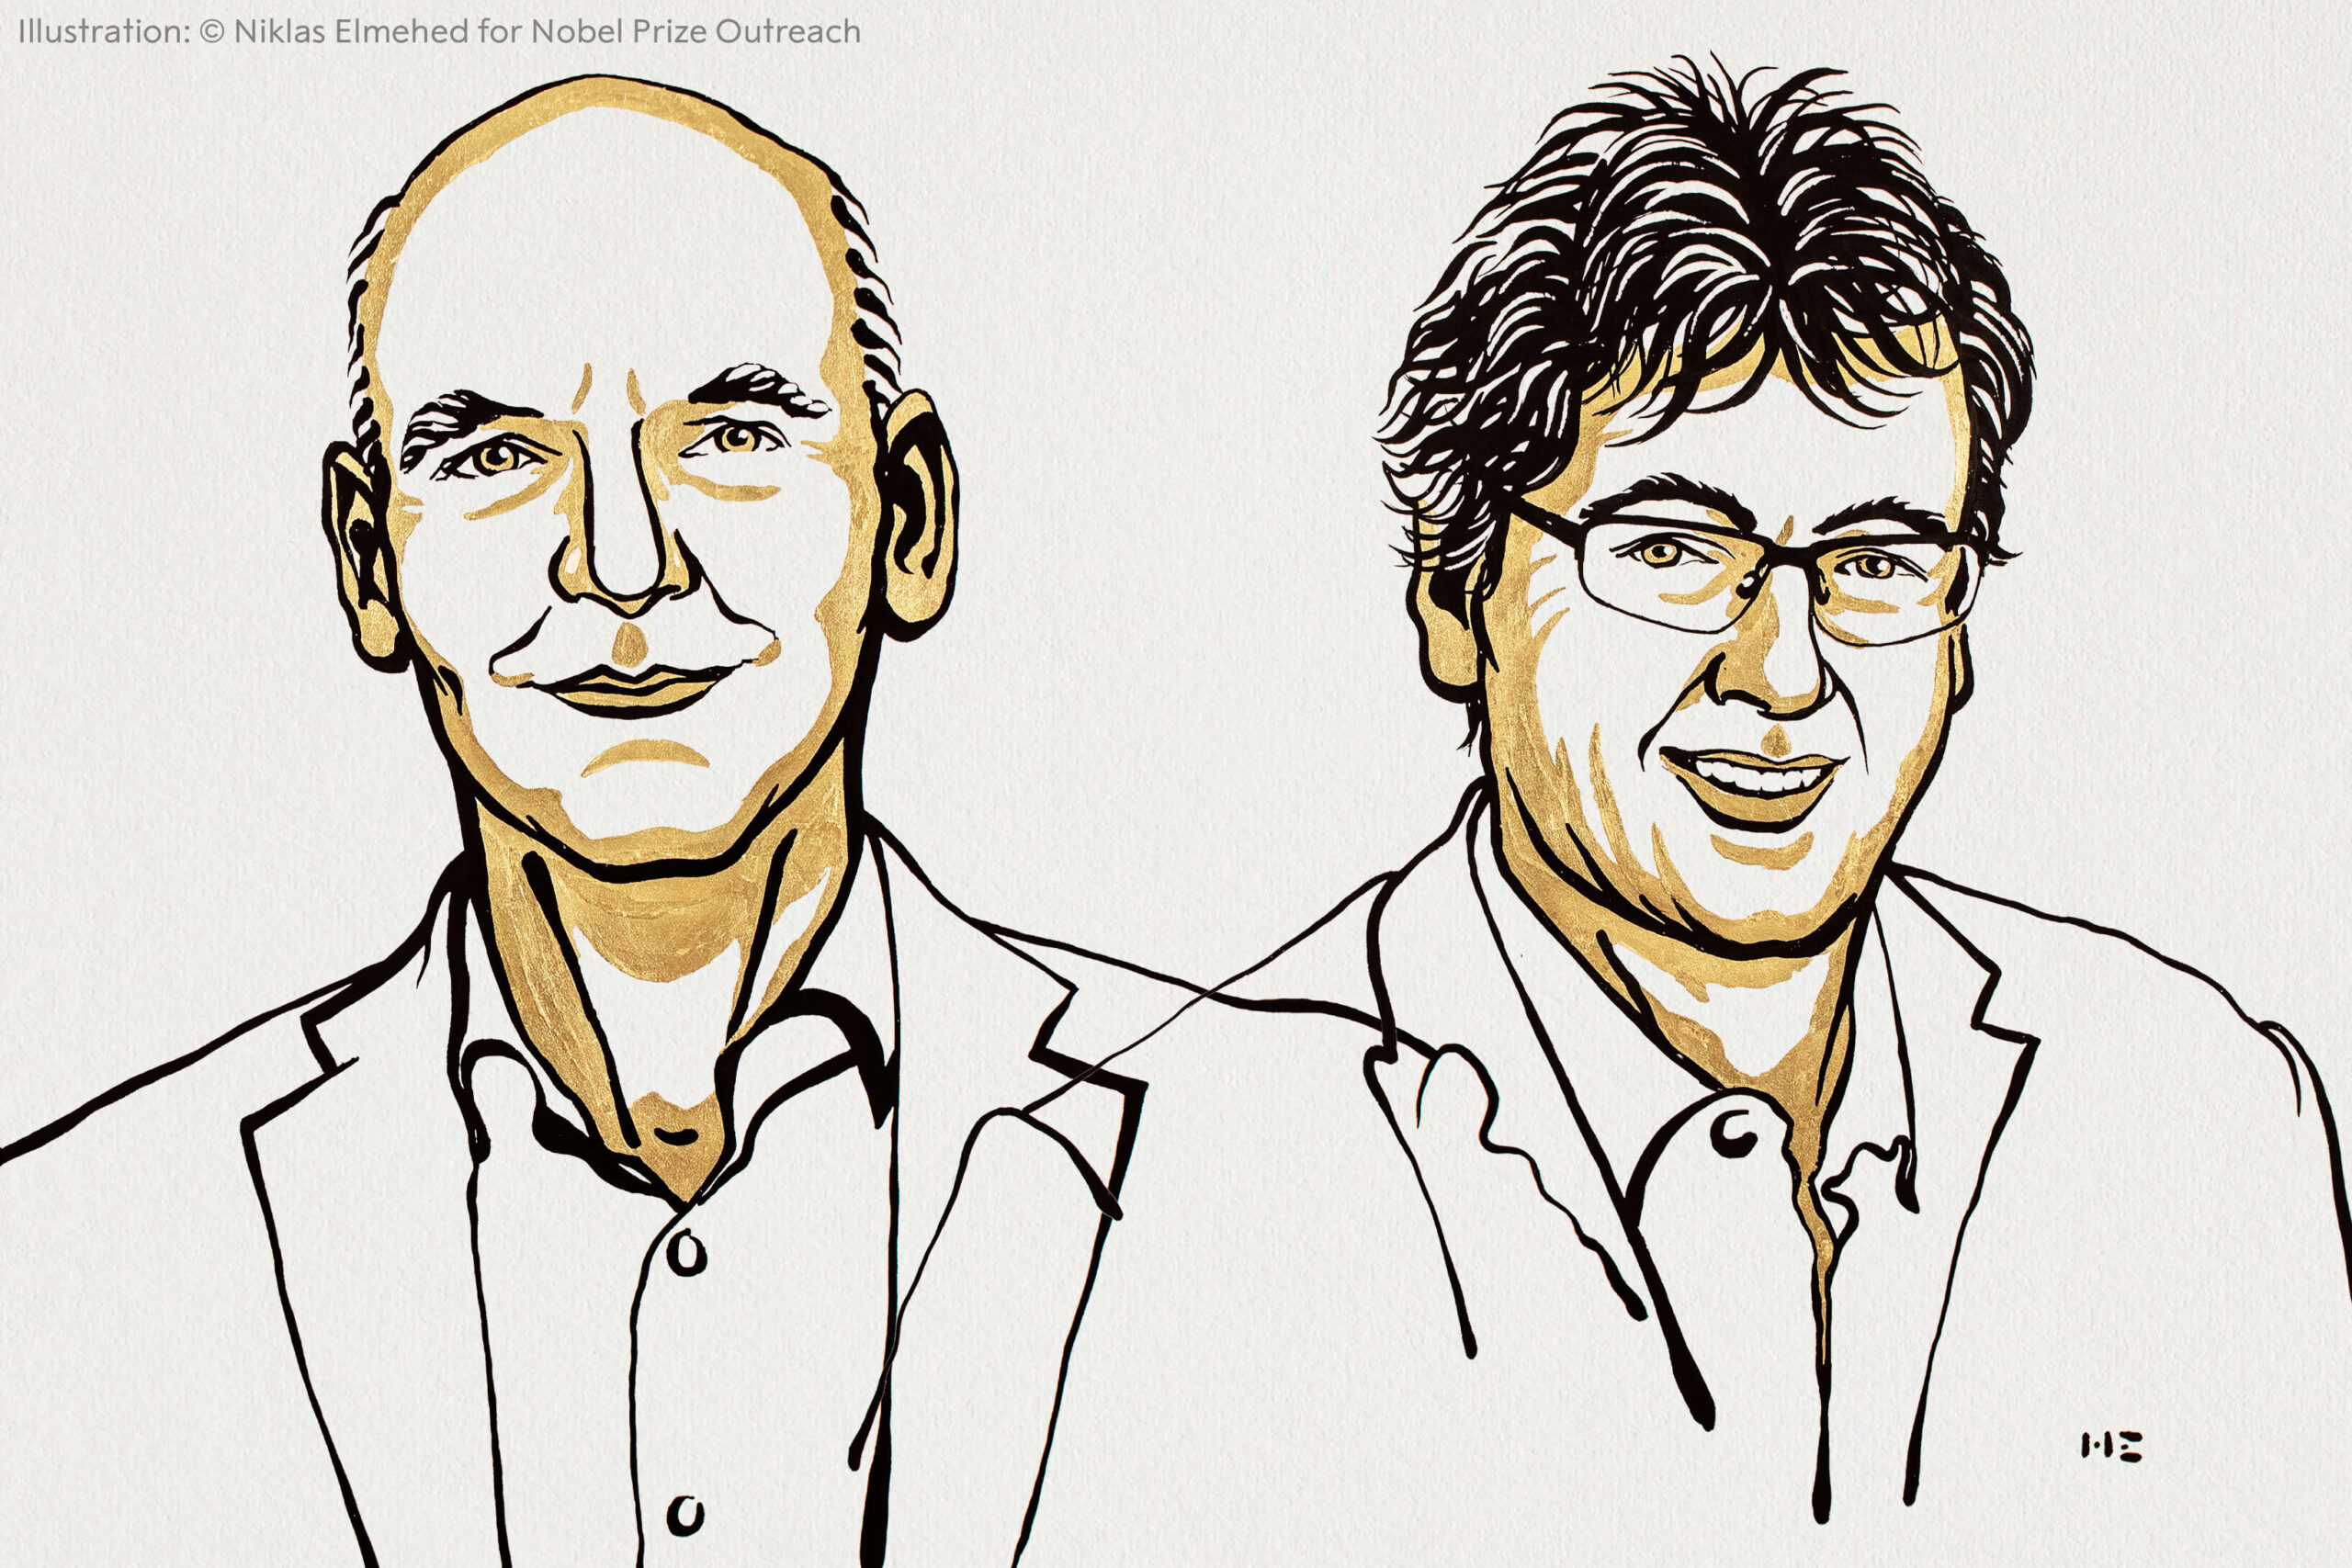 Line drawings of the winners of the Nobel Prize in Chemistry